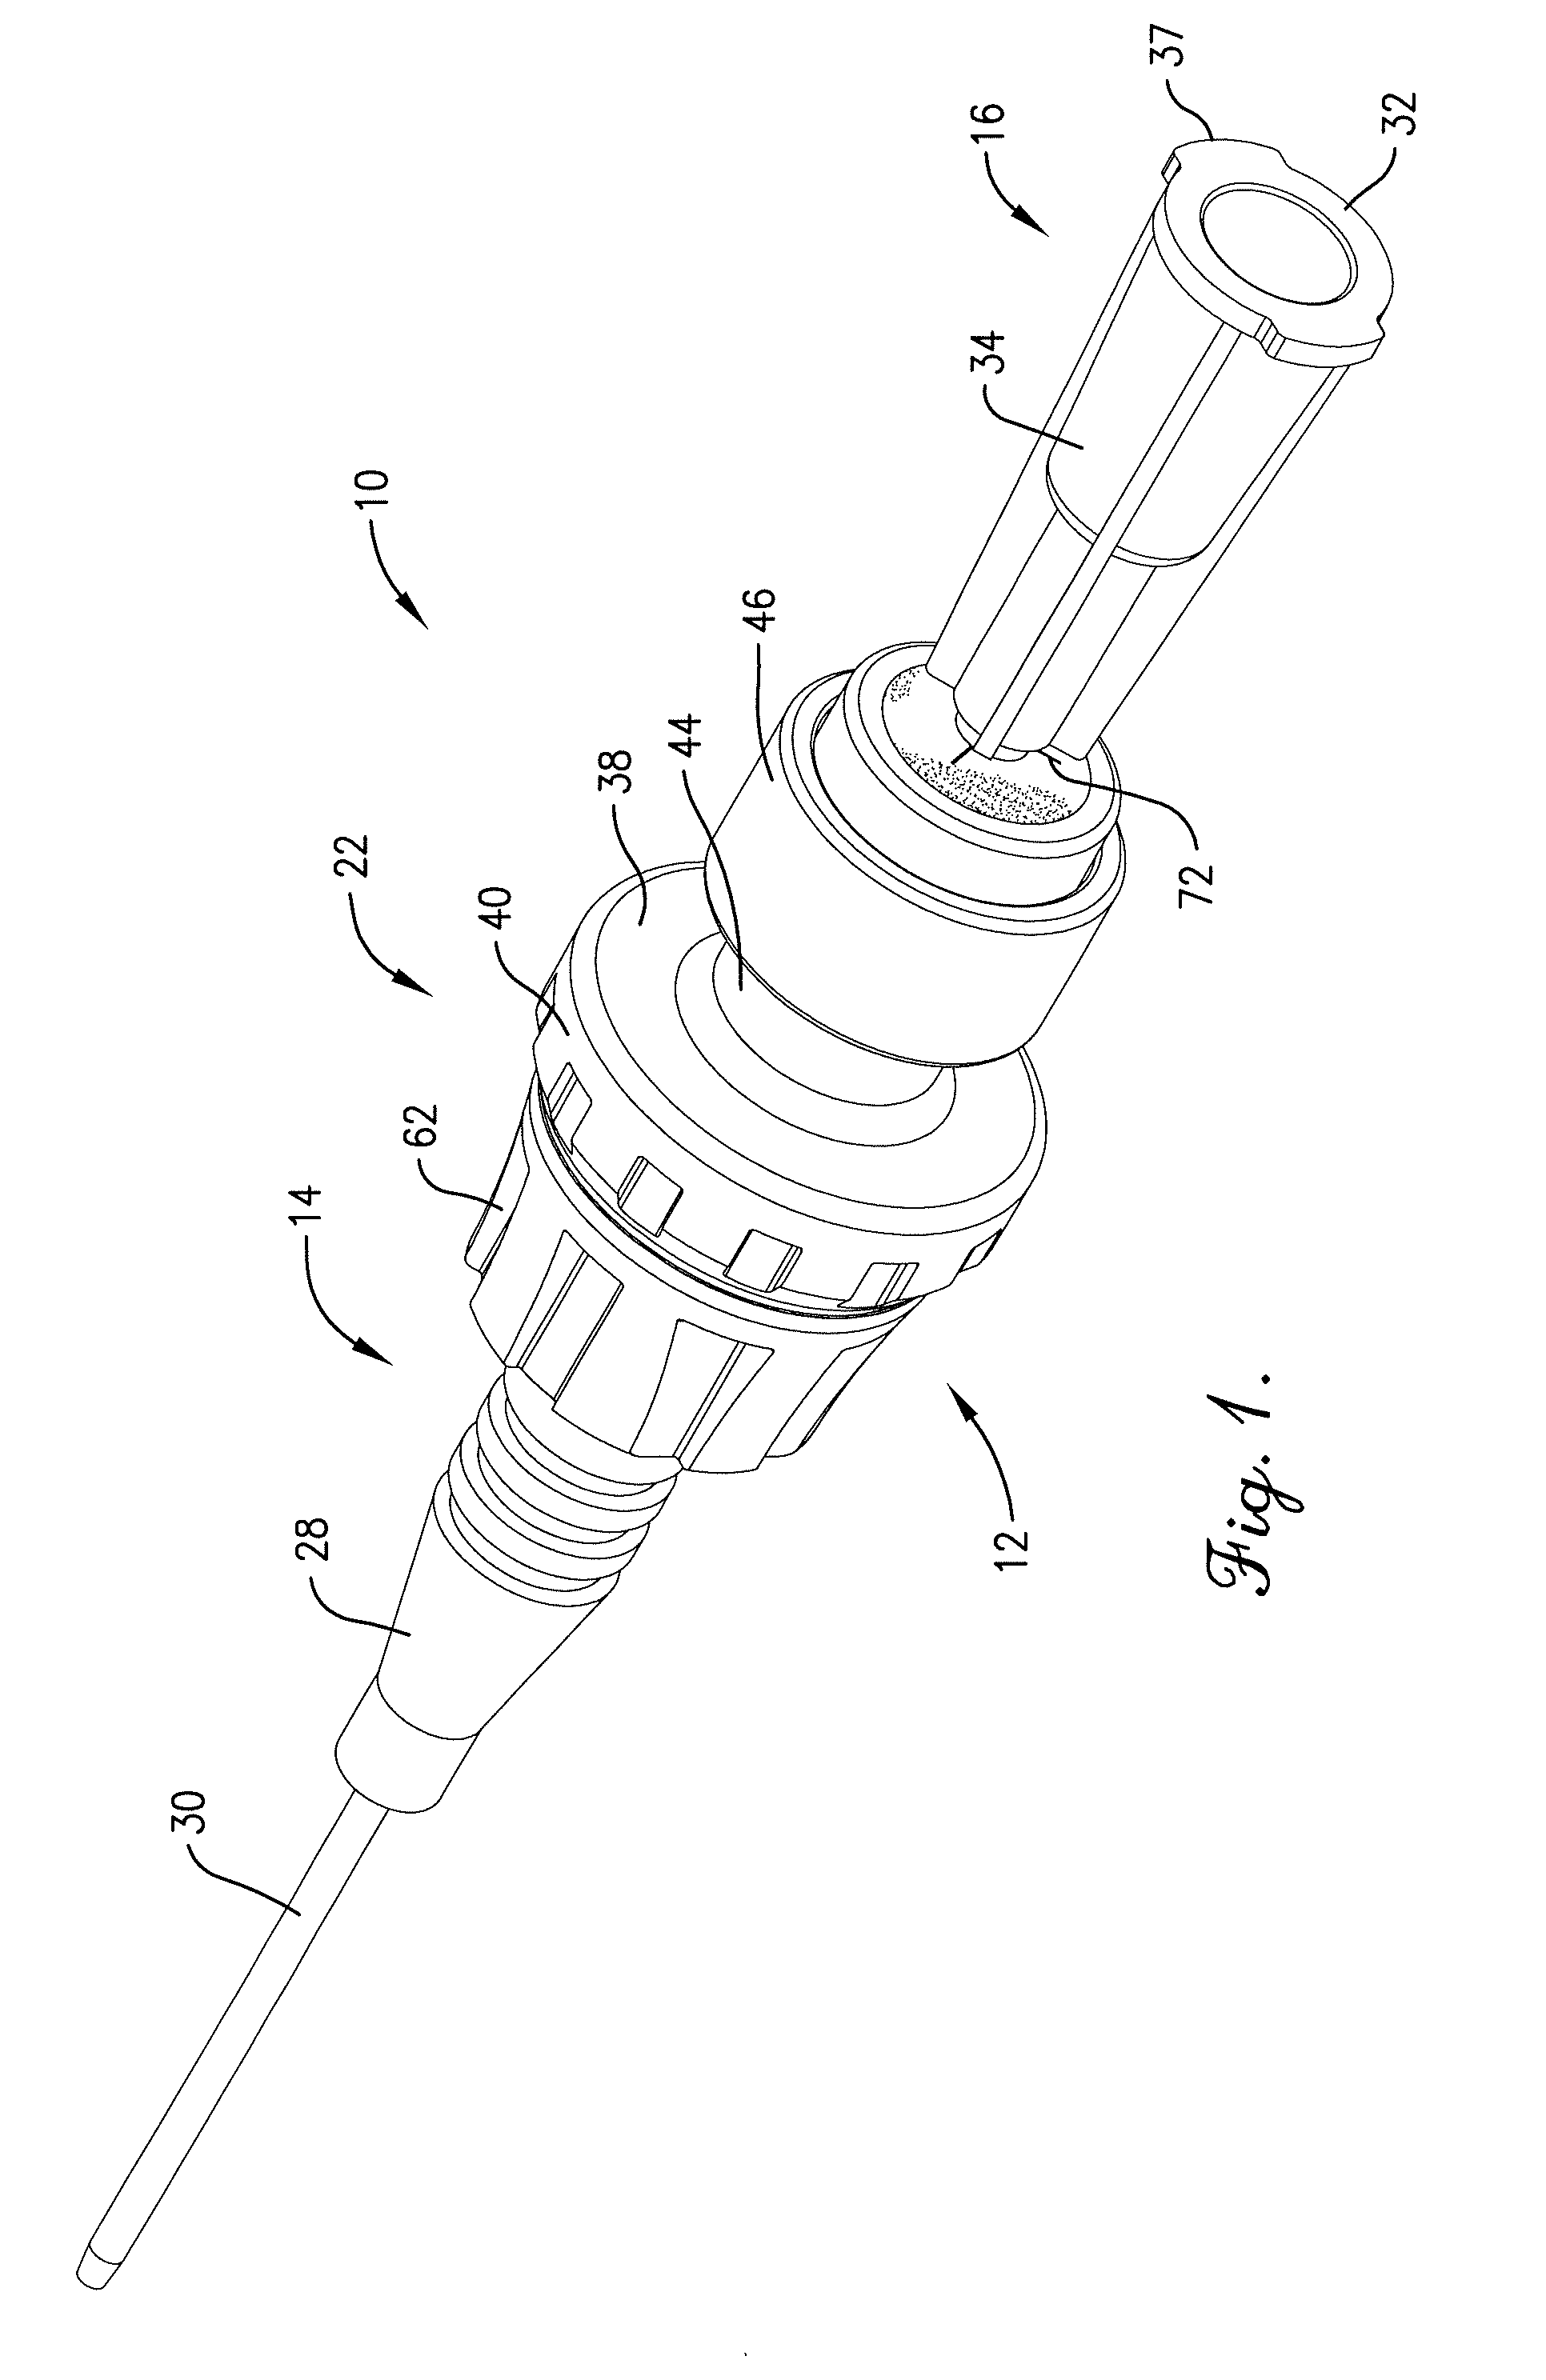 Intravenous injection site with split septum and pressure activated flow control valve